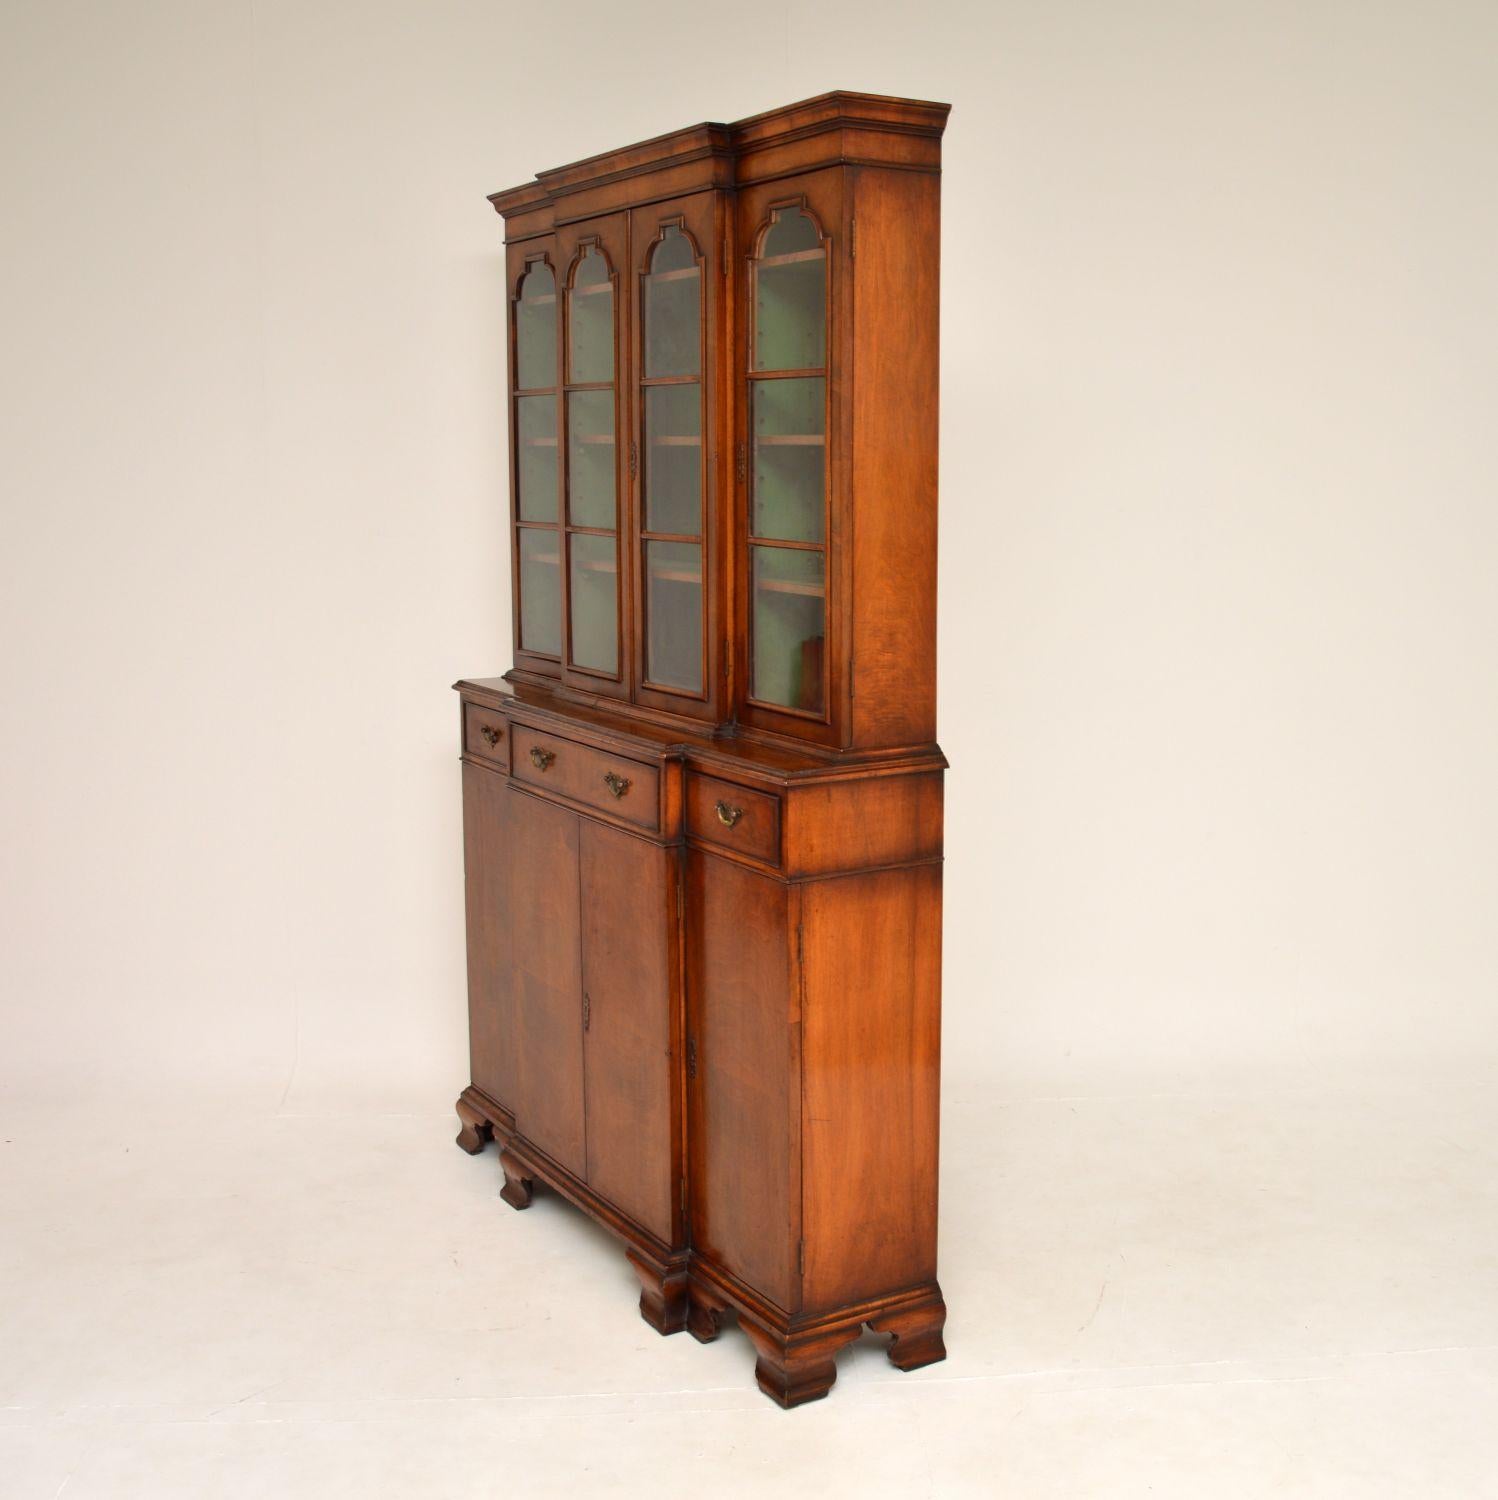 Early 20th Century Antique Inlaid Walnut Breakfront Bookcase